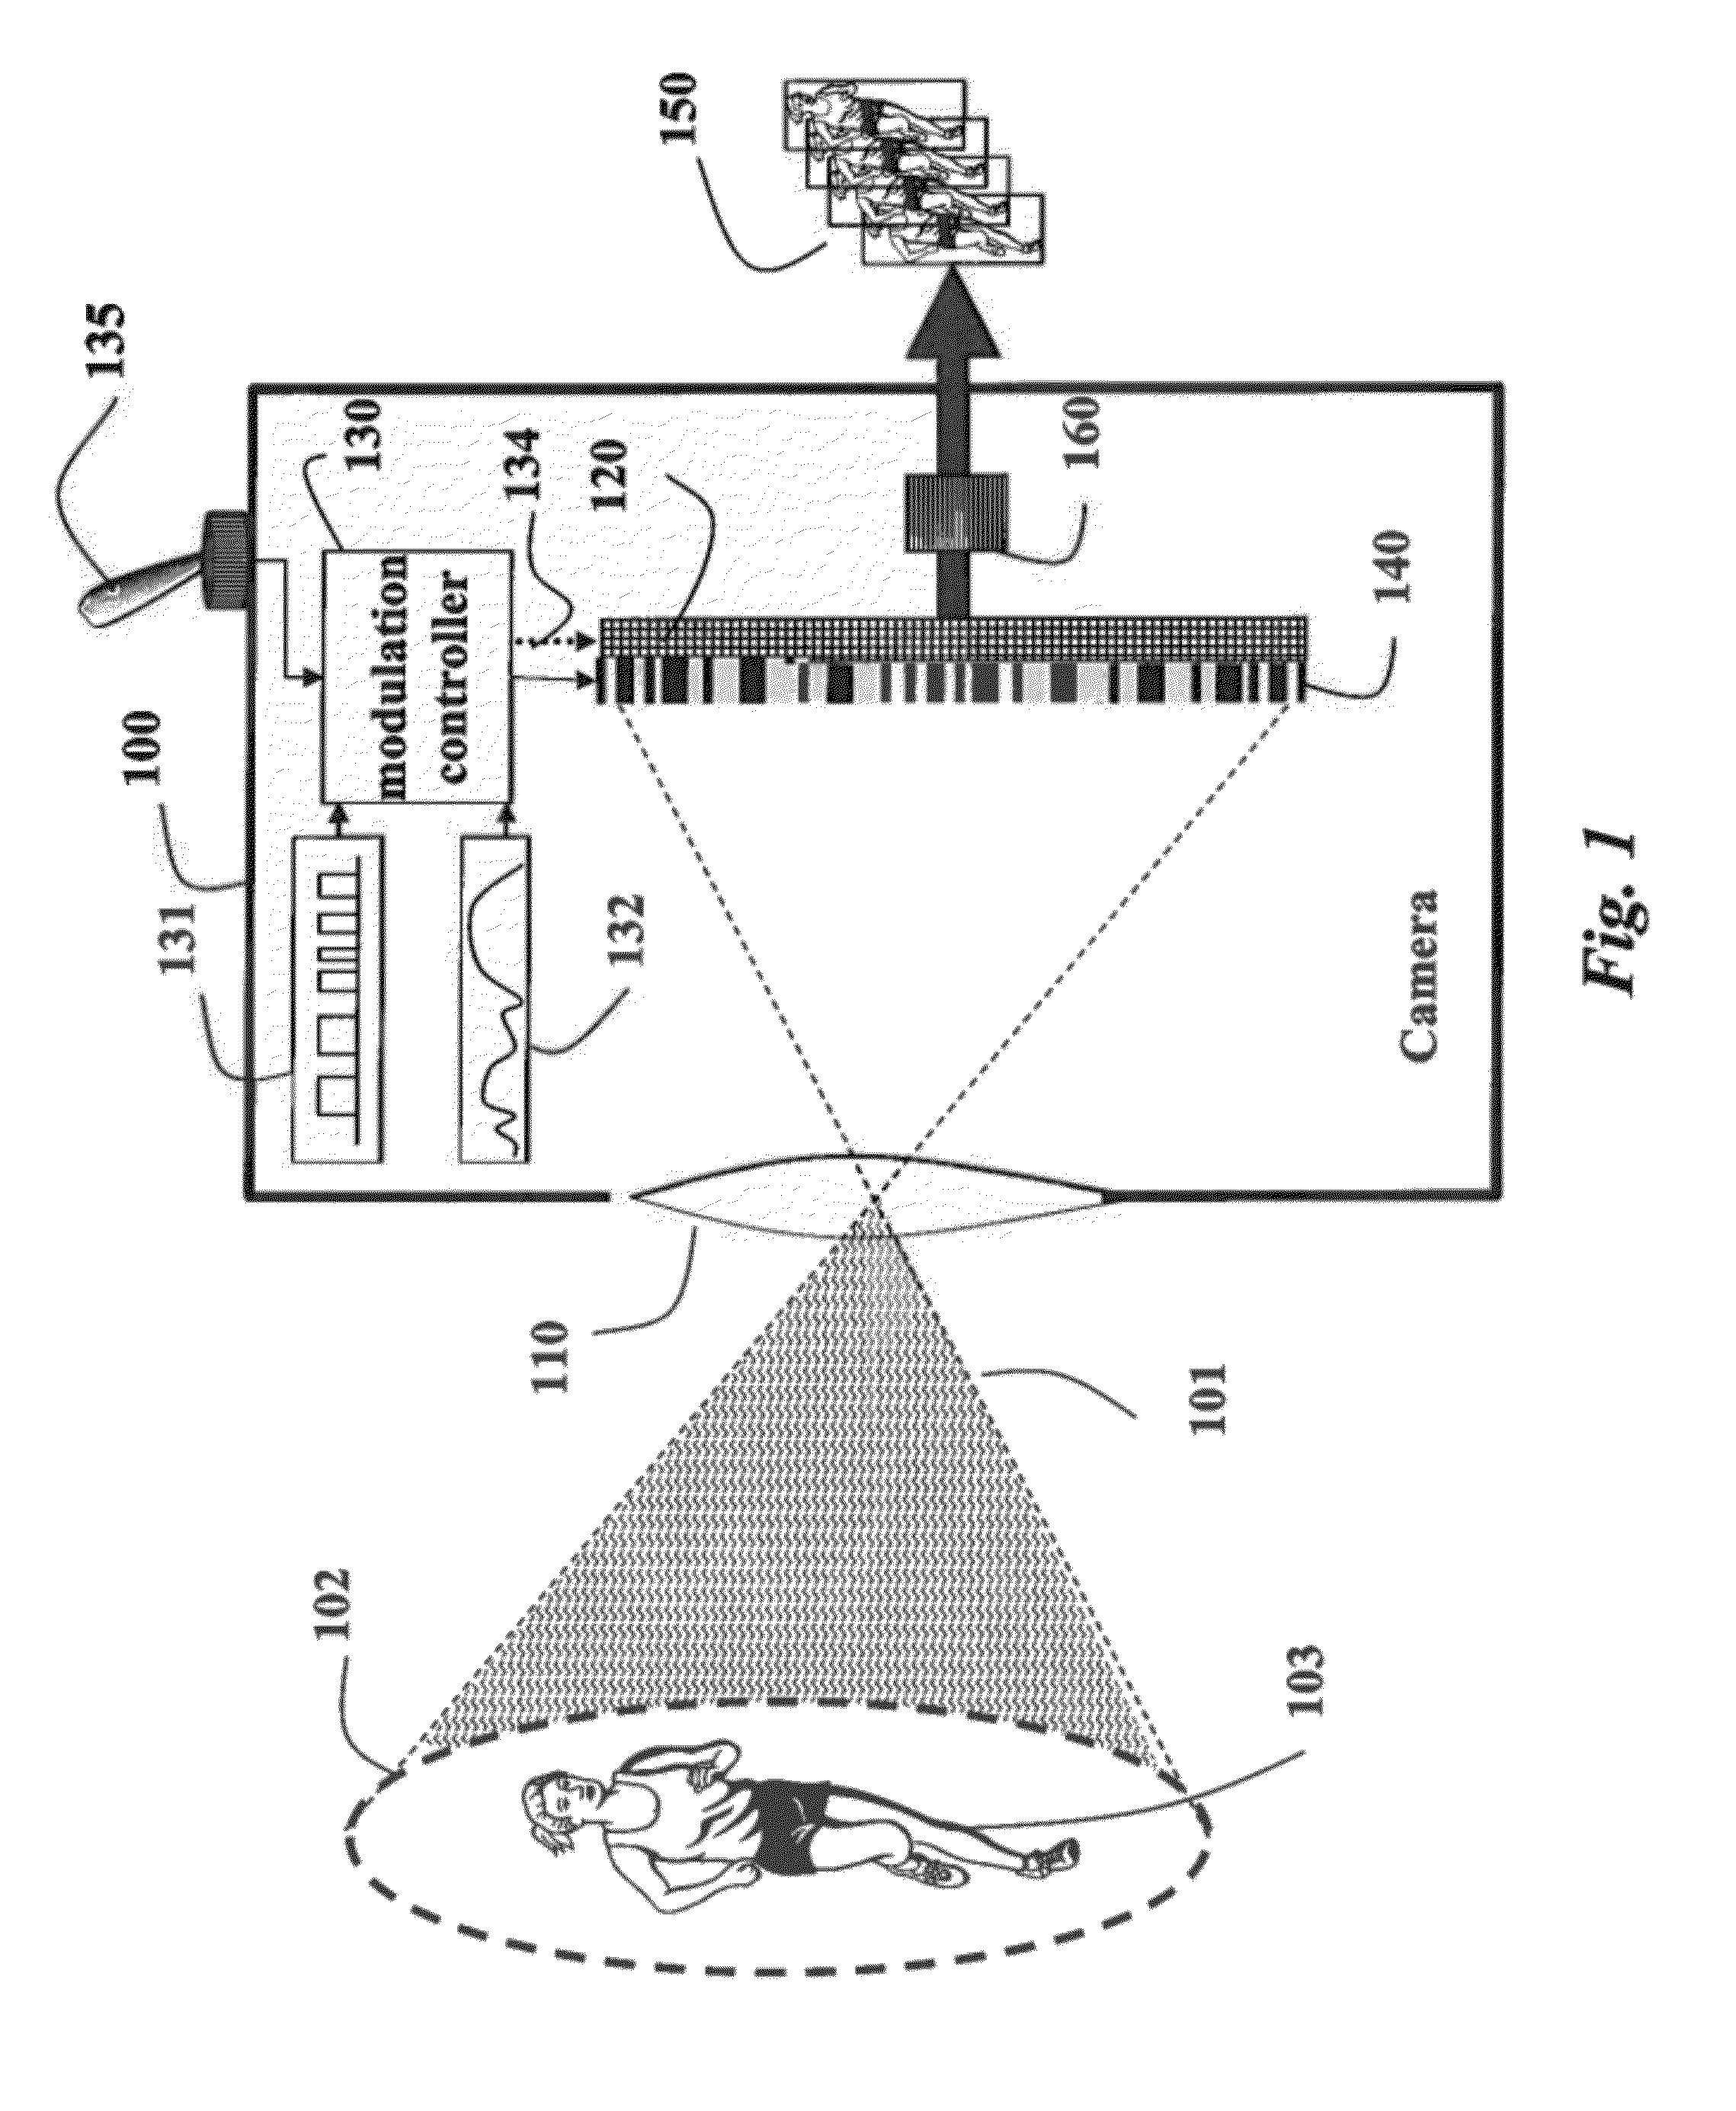 Programmable Camera and Video Reconstruction Method